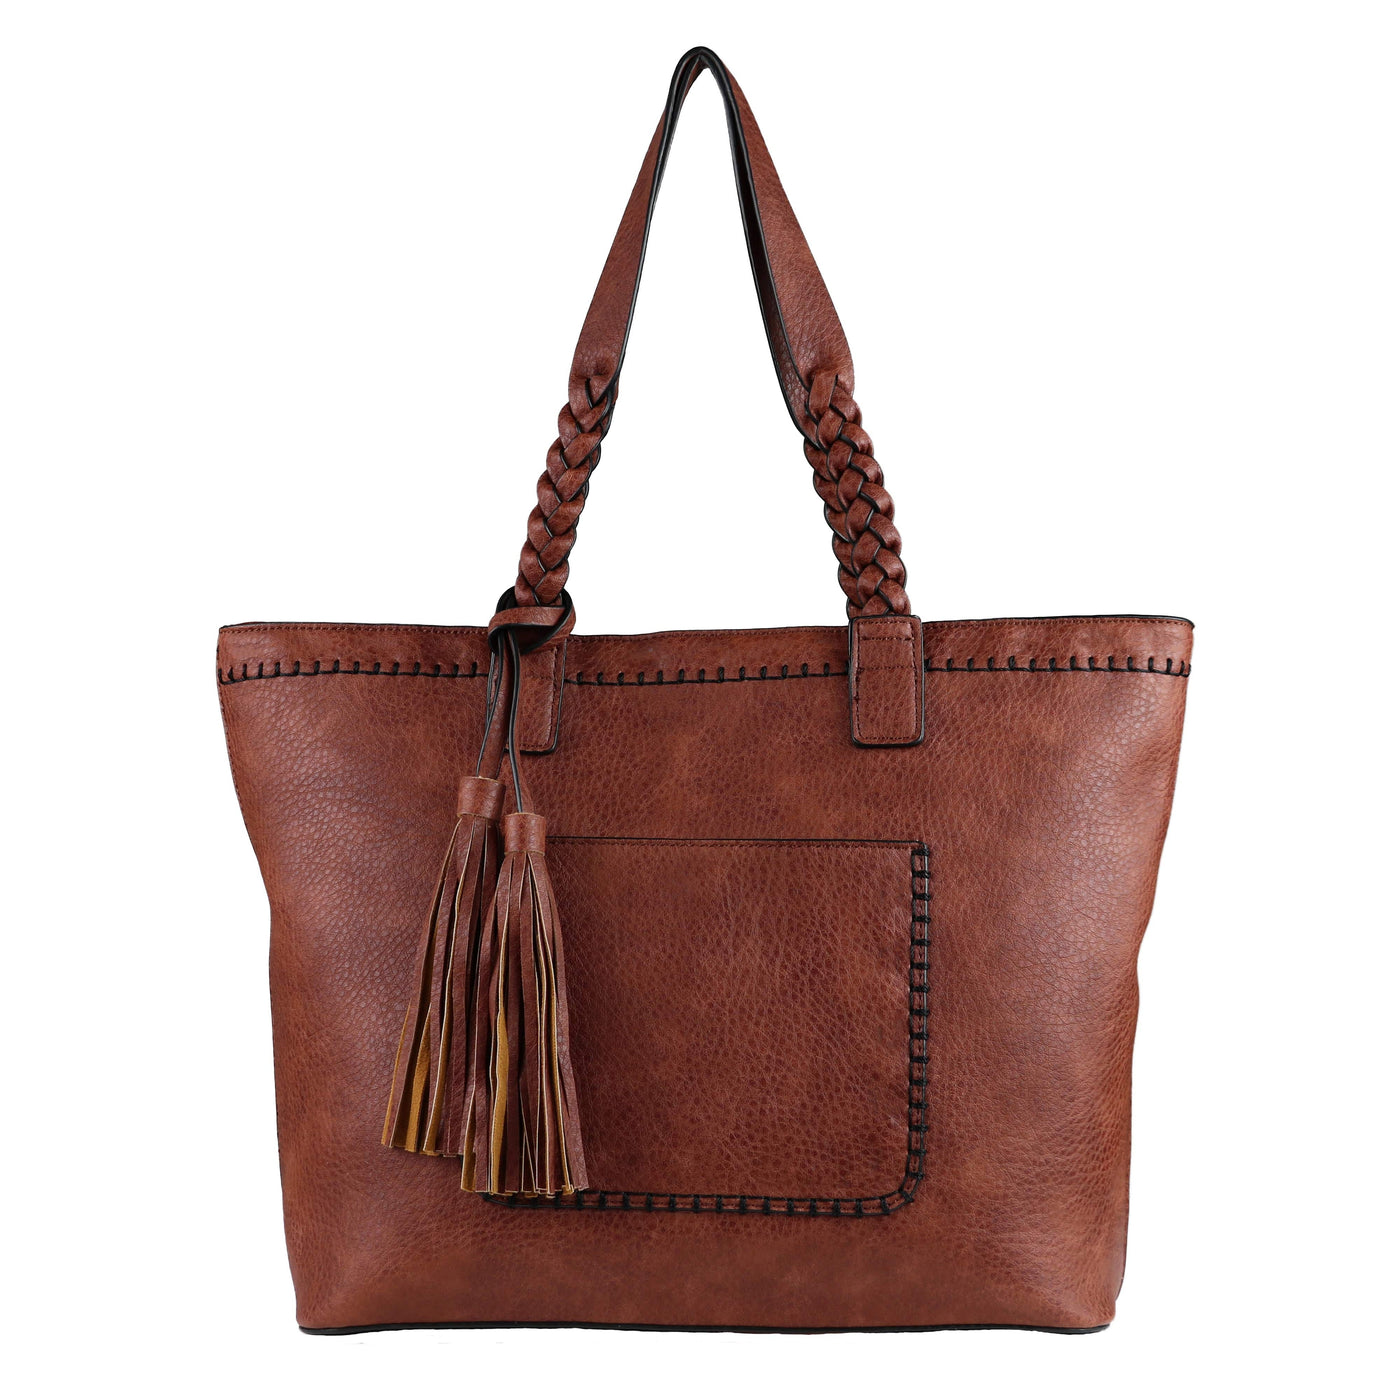 Lady Conceal Concealed Carry Purse Cinnamon Concealed Carry Cora Tote Bag by Lady Conceal